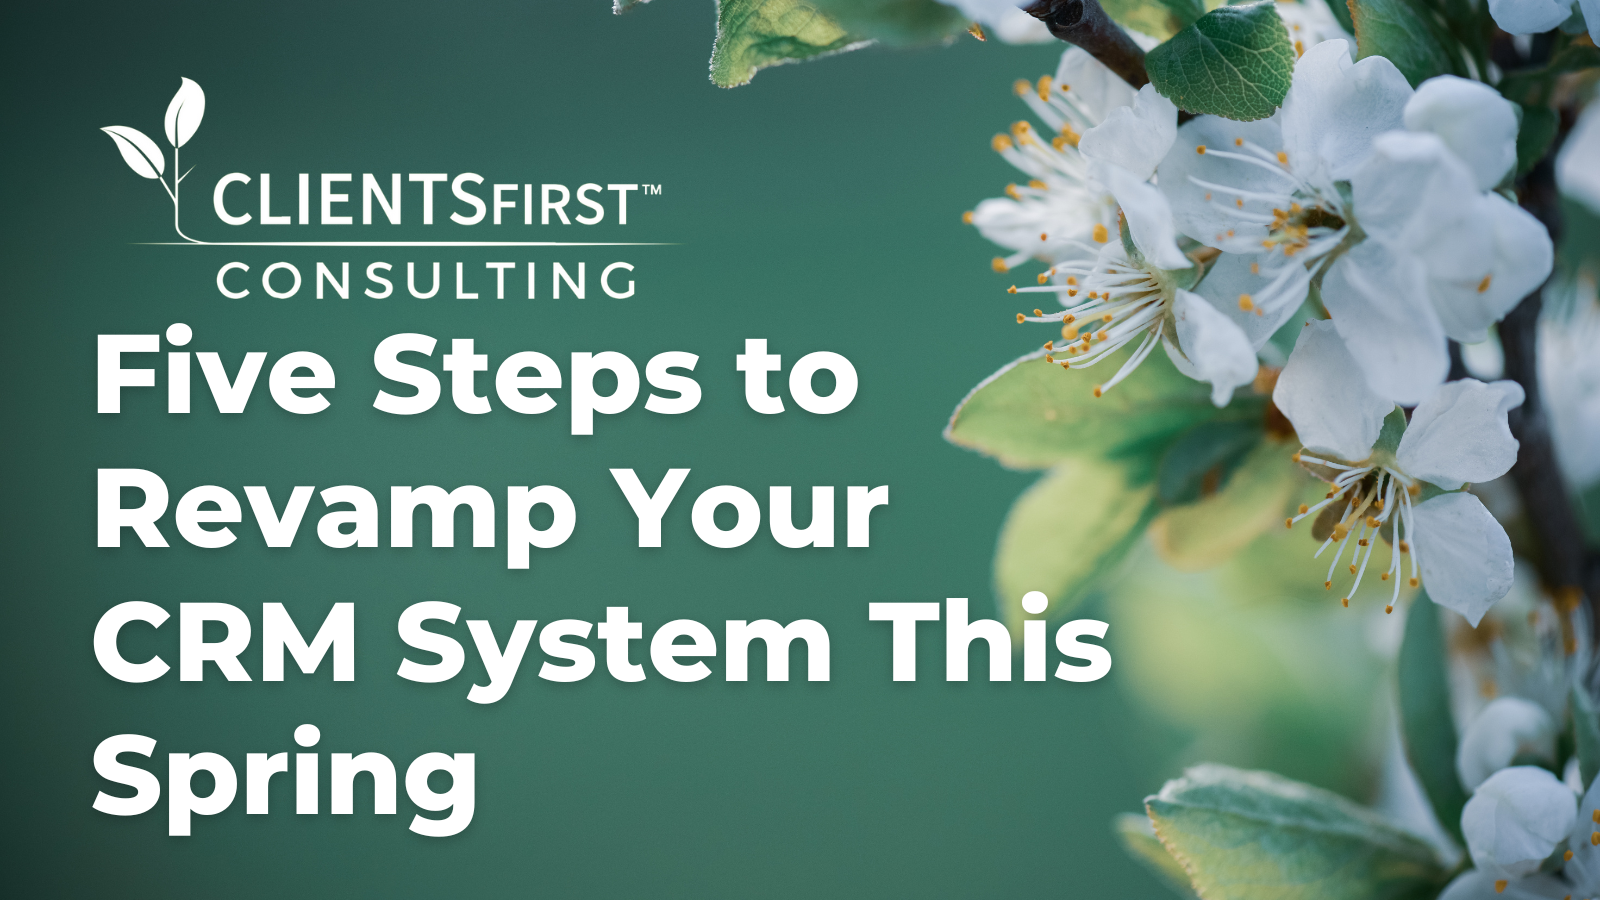 A gree background with white spring flowers on the right side with the title "Five Steps to Revamp Your CRM System This Spring" on the right